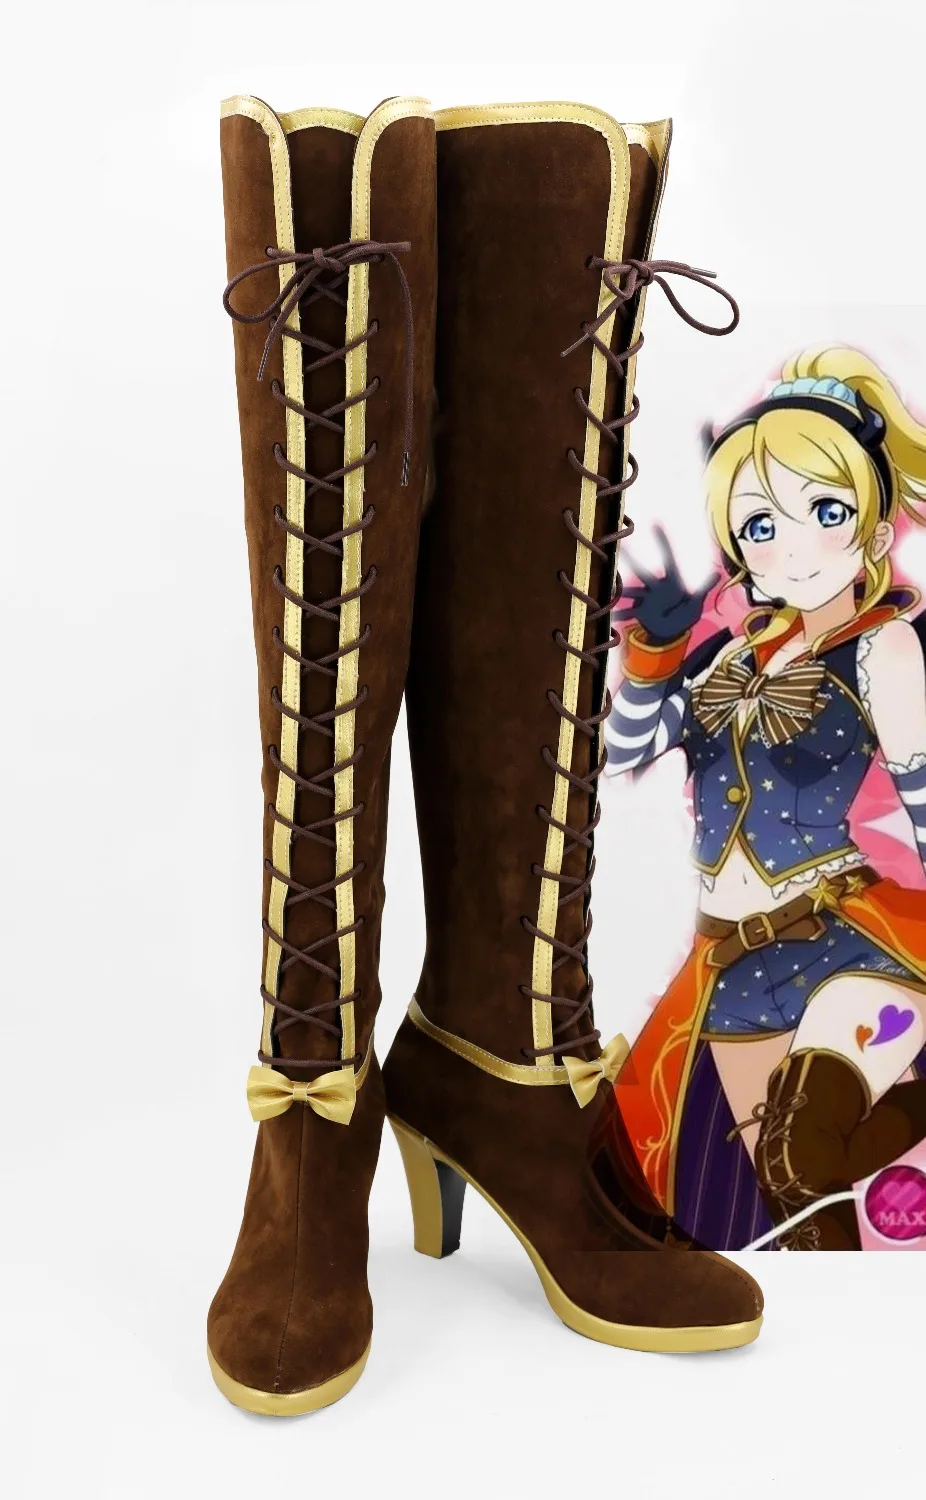 

Anime Lovelive Maki Nishikino Cosplay Boots Ellie Love live For Halloween Carnival Christmas Cosplay Shoes Boots